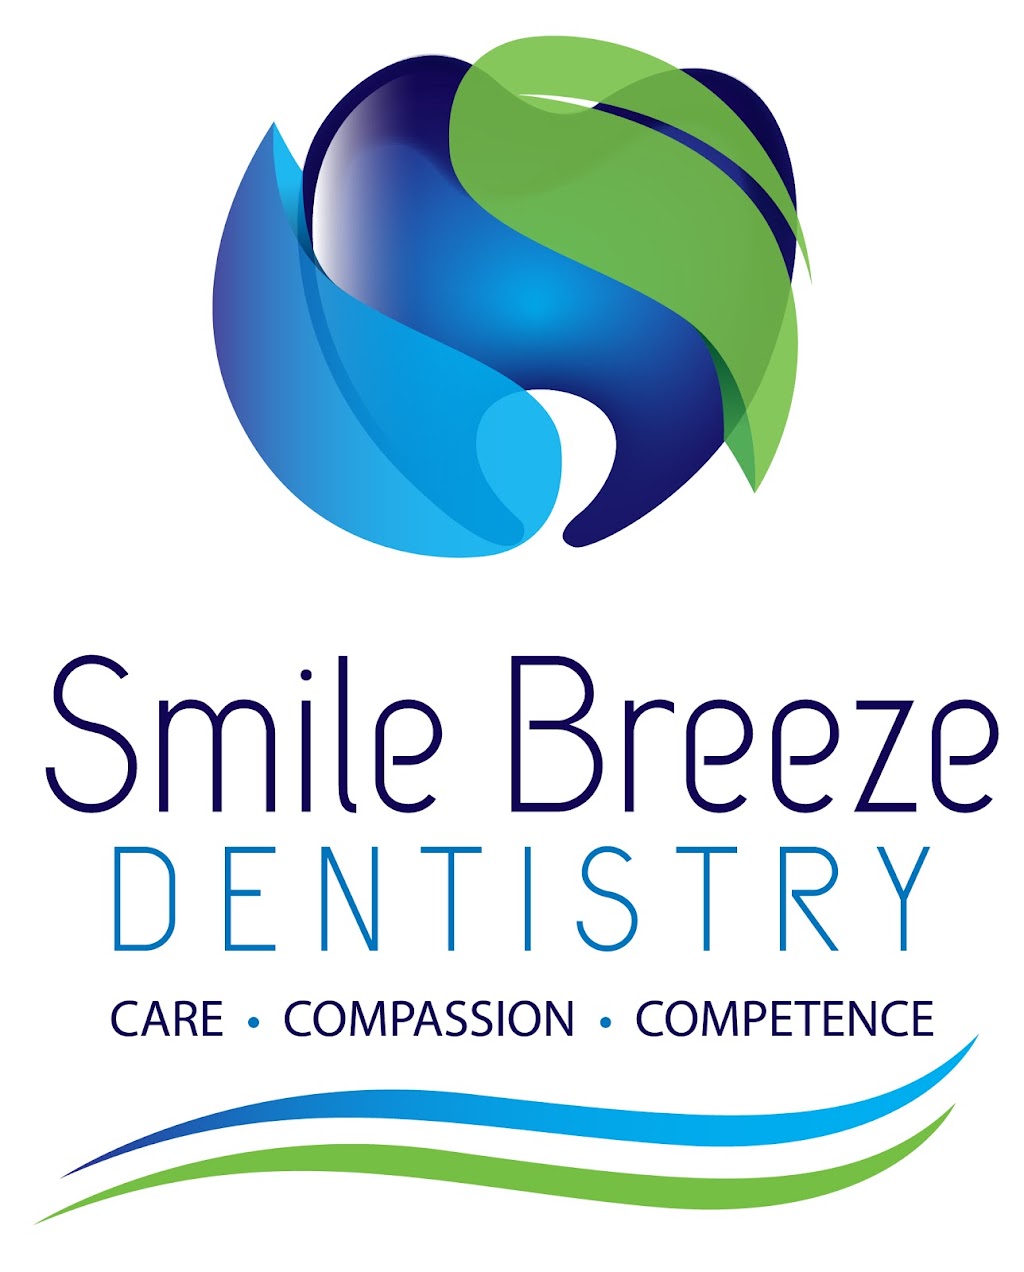 Smile Breeze Dentistry | 5285 Independence Pkwy STE 200, Frisco, TX 75035, USA | Phone: (972) 464-1124